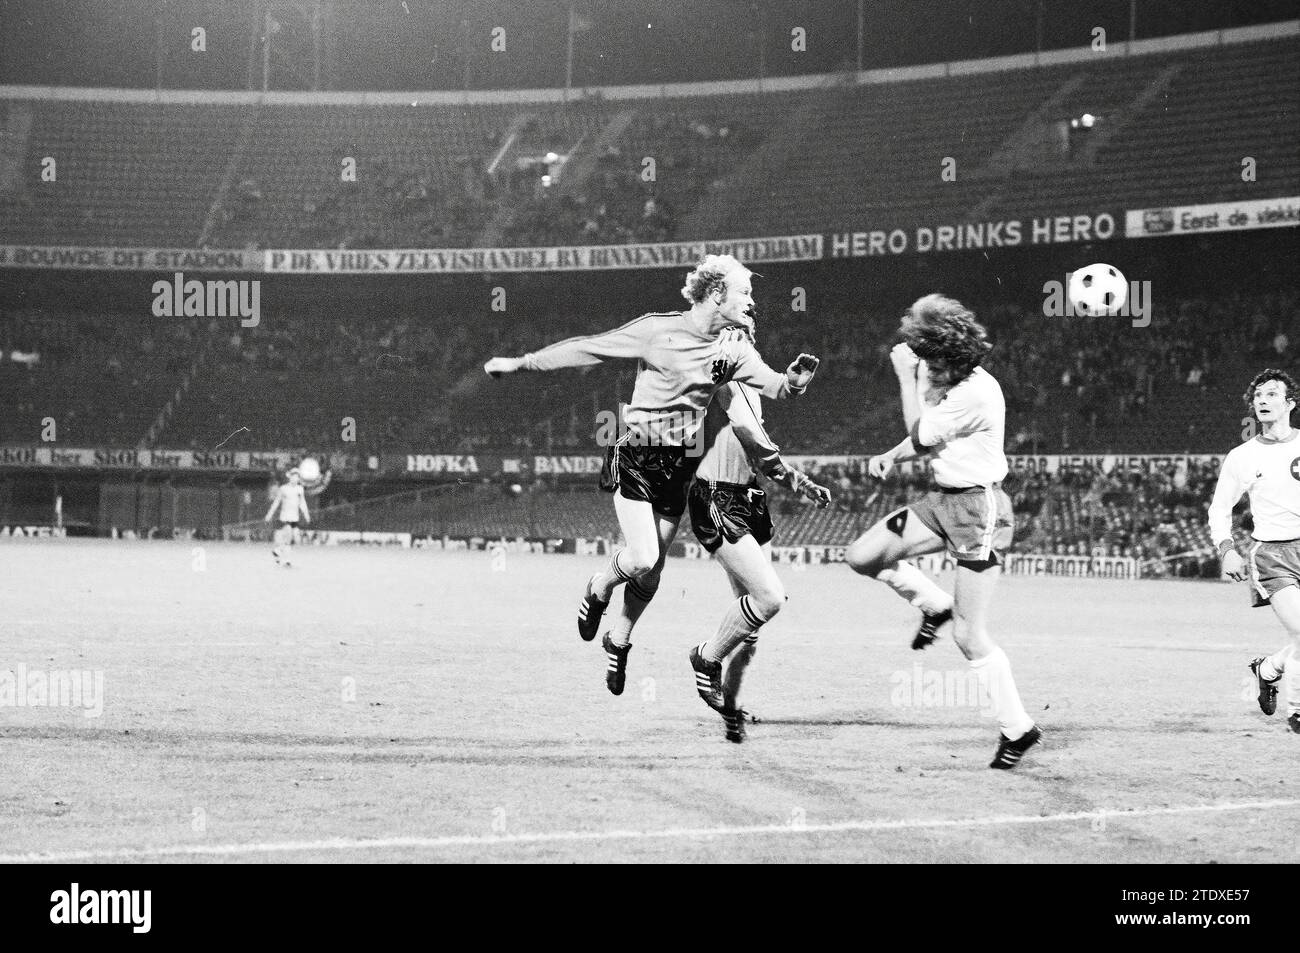 Netherlands - Switzerland, Football Netherlands, 09-10-1974, Whizgle News from the Past, Tailored for the Future. Explore historical narratives, Dutch The Netherlands agency image with a modern perspective, bridging the gap between yesterday's events and tomorrow's insights. A timeless journey shaping the stories that shape our future. Stock Photo